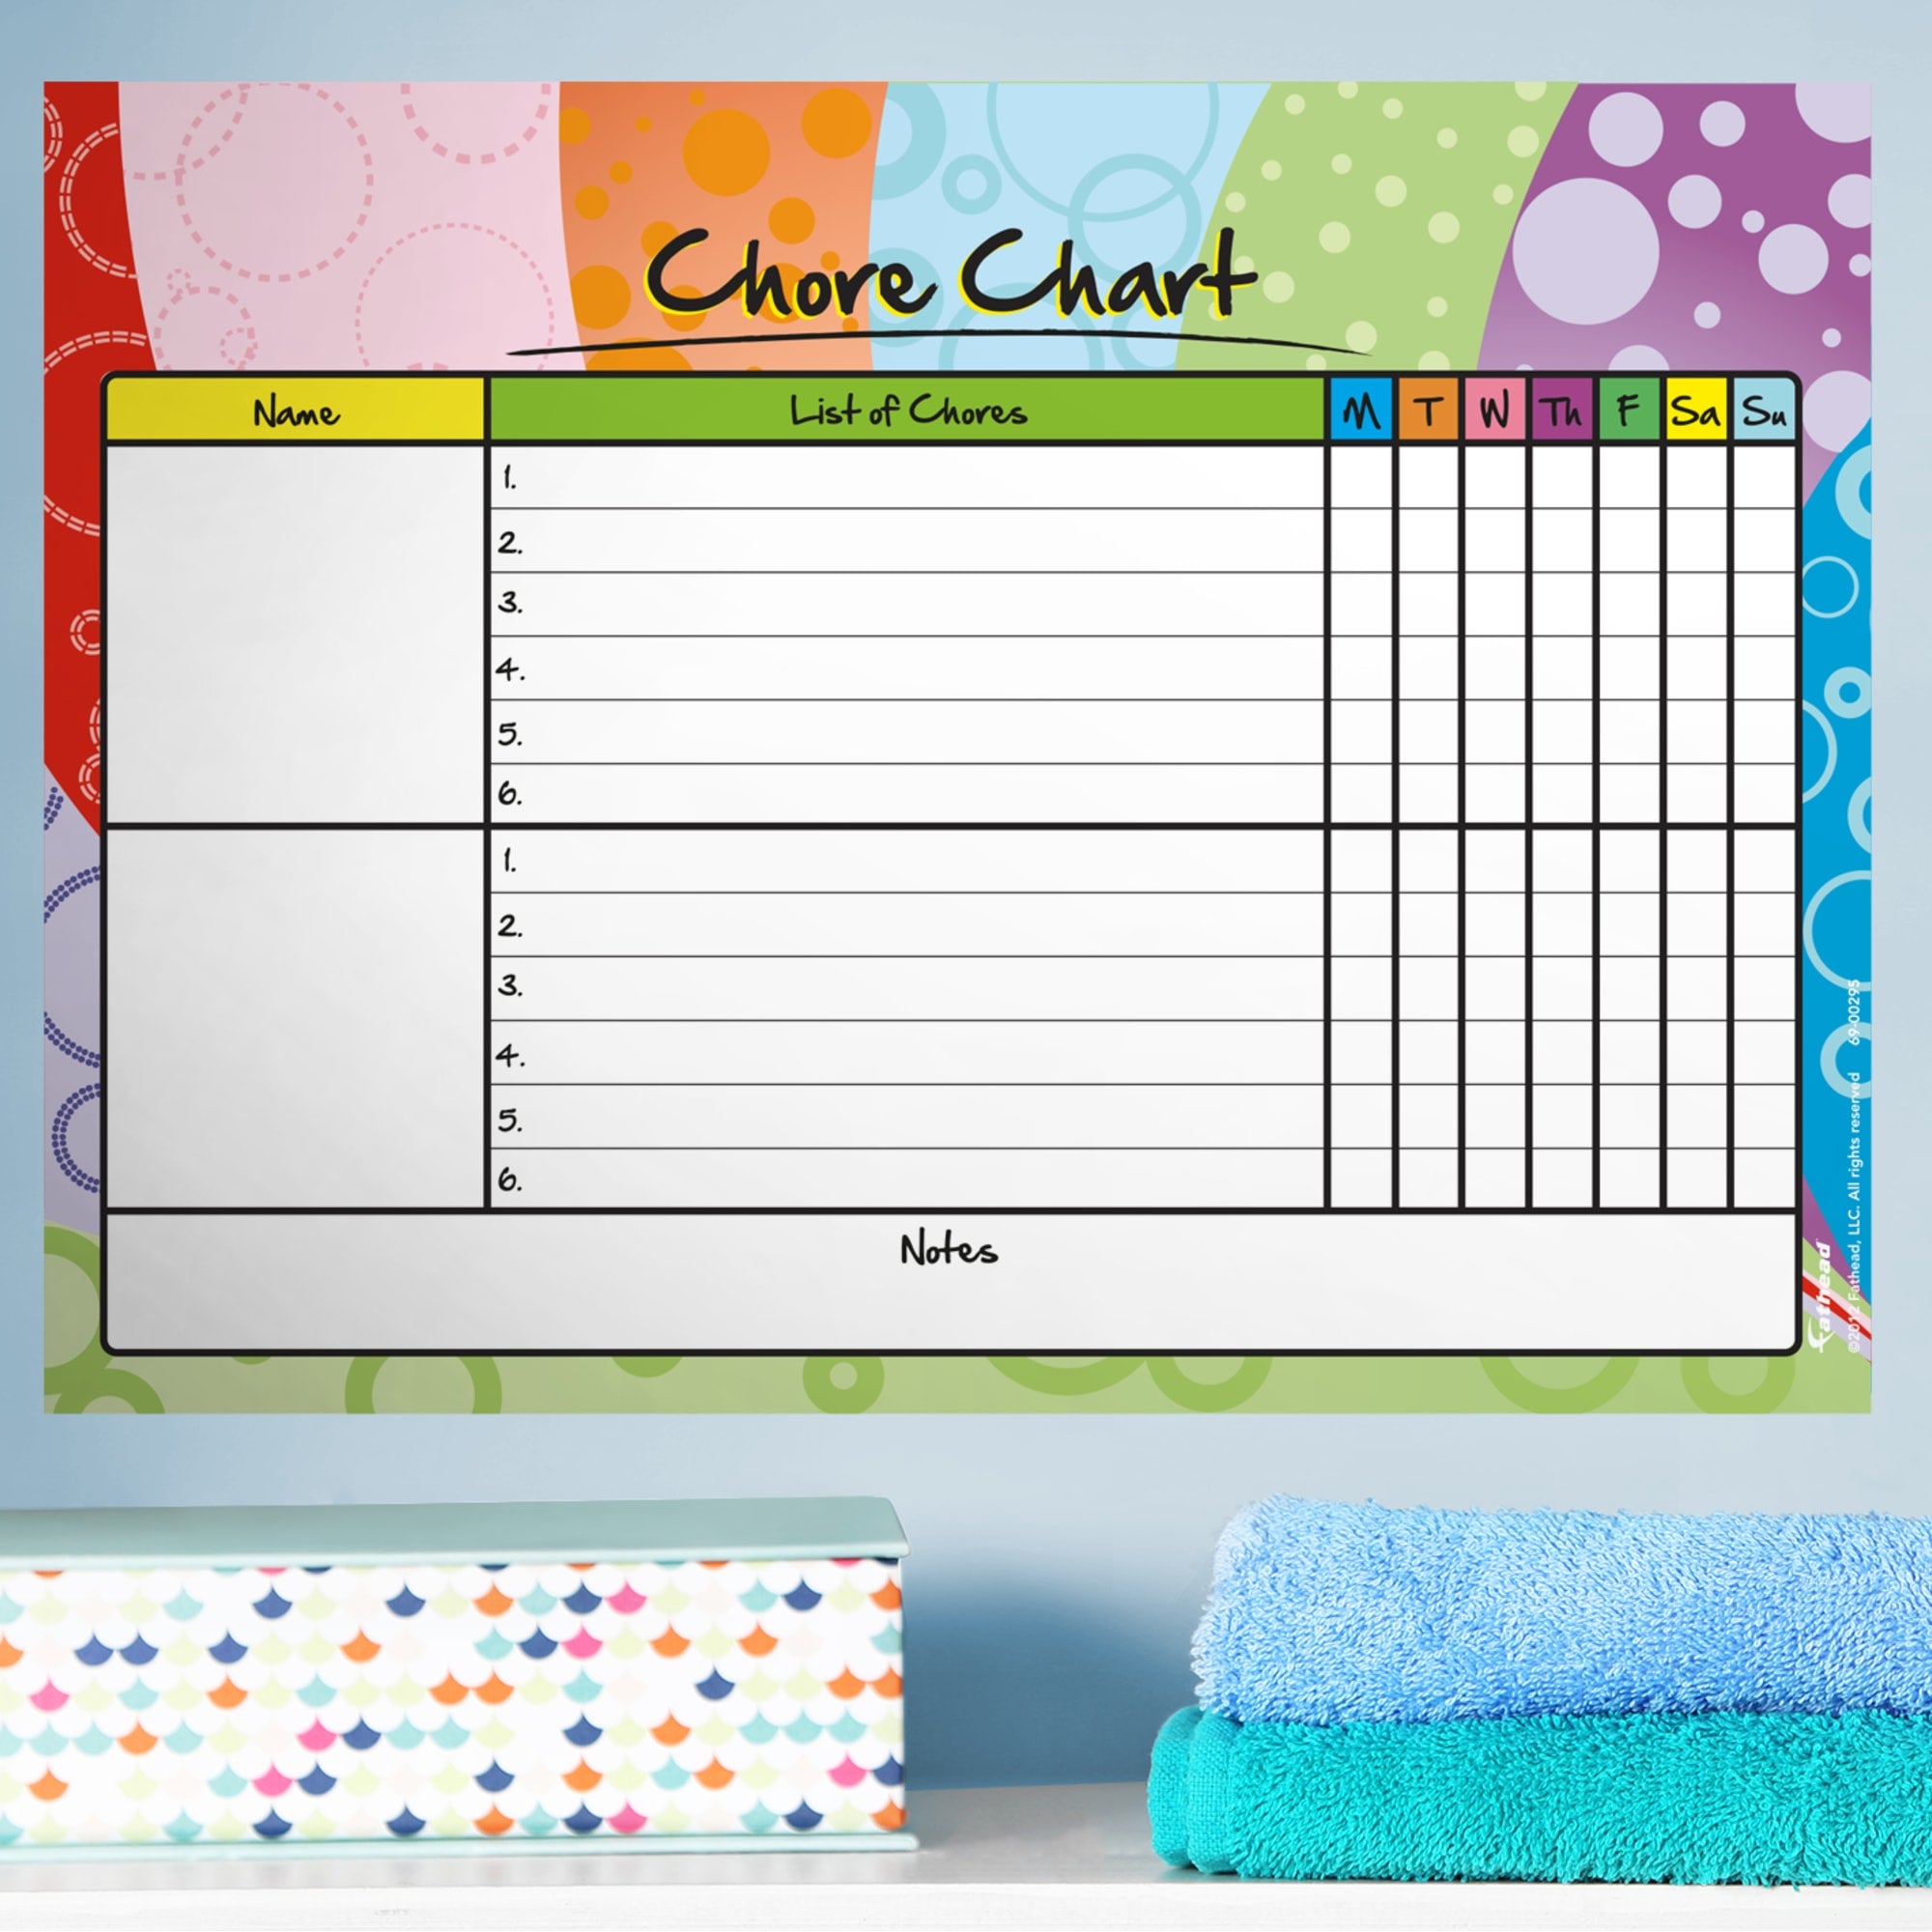 Chore Chart - Removable Dry Erase Vinyl Decal 0"W x 12"H by Fathead